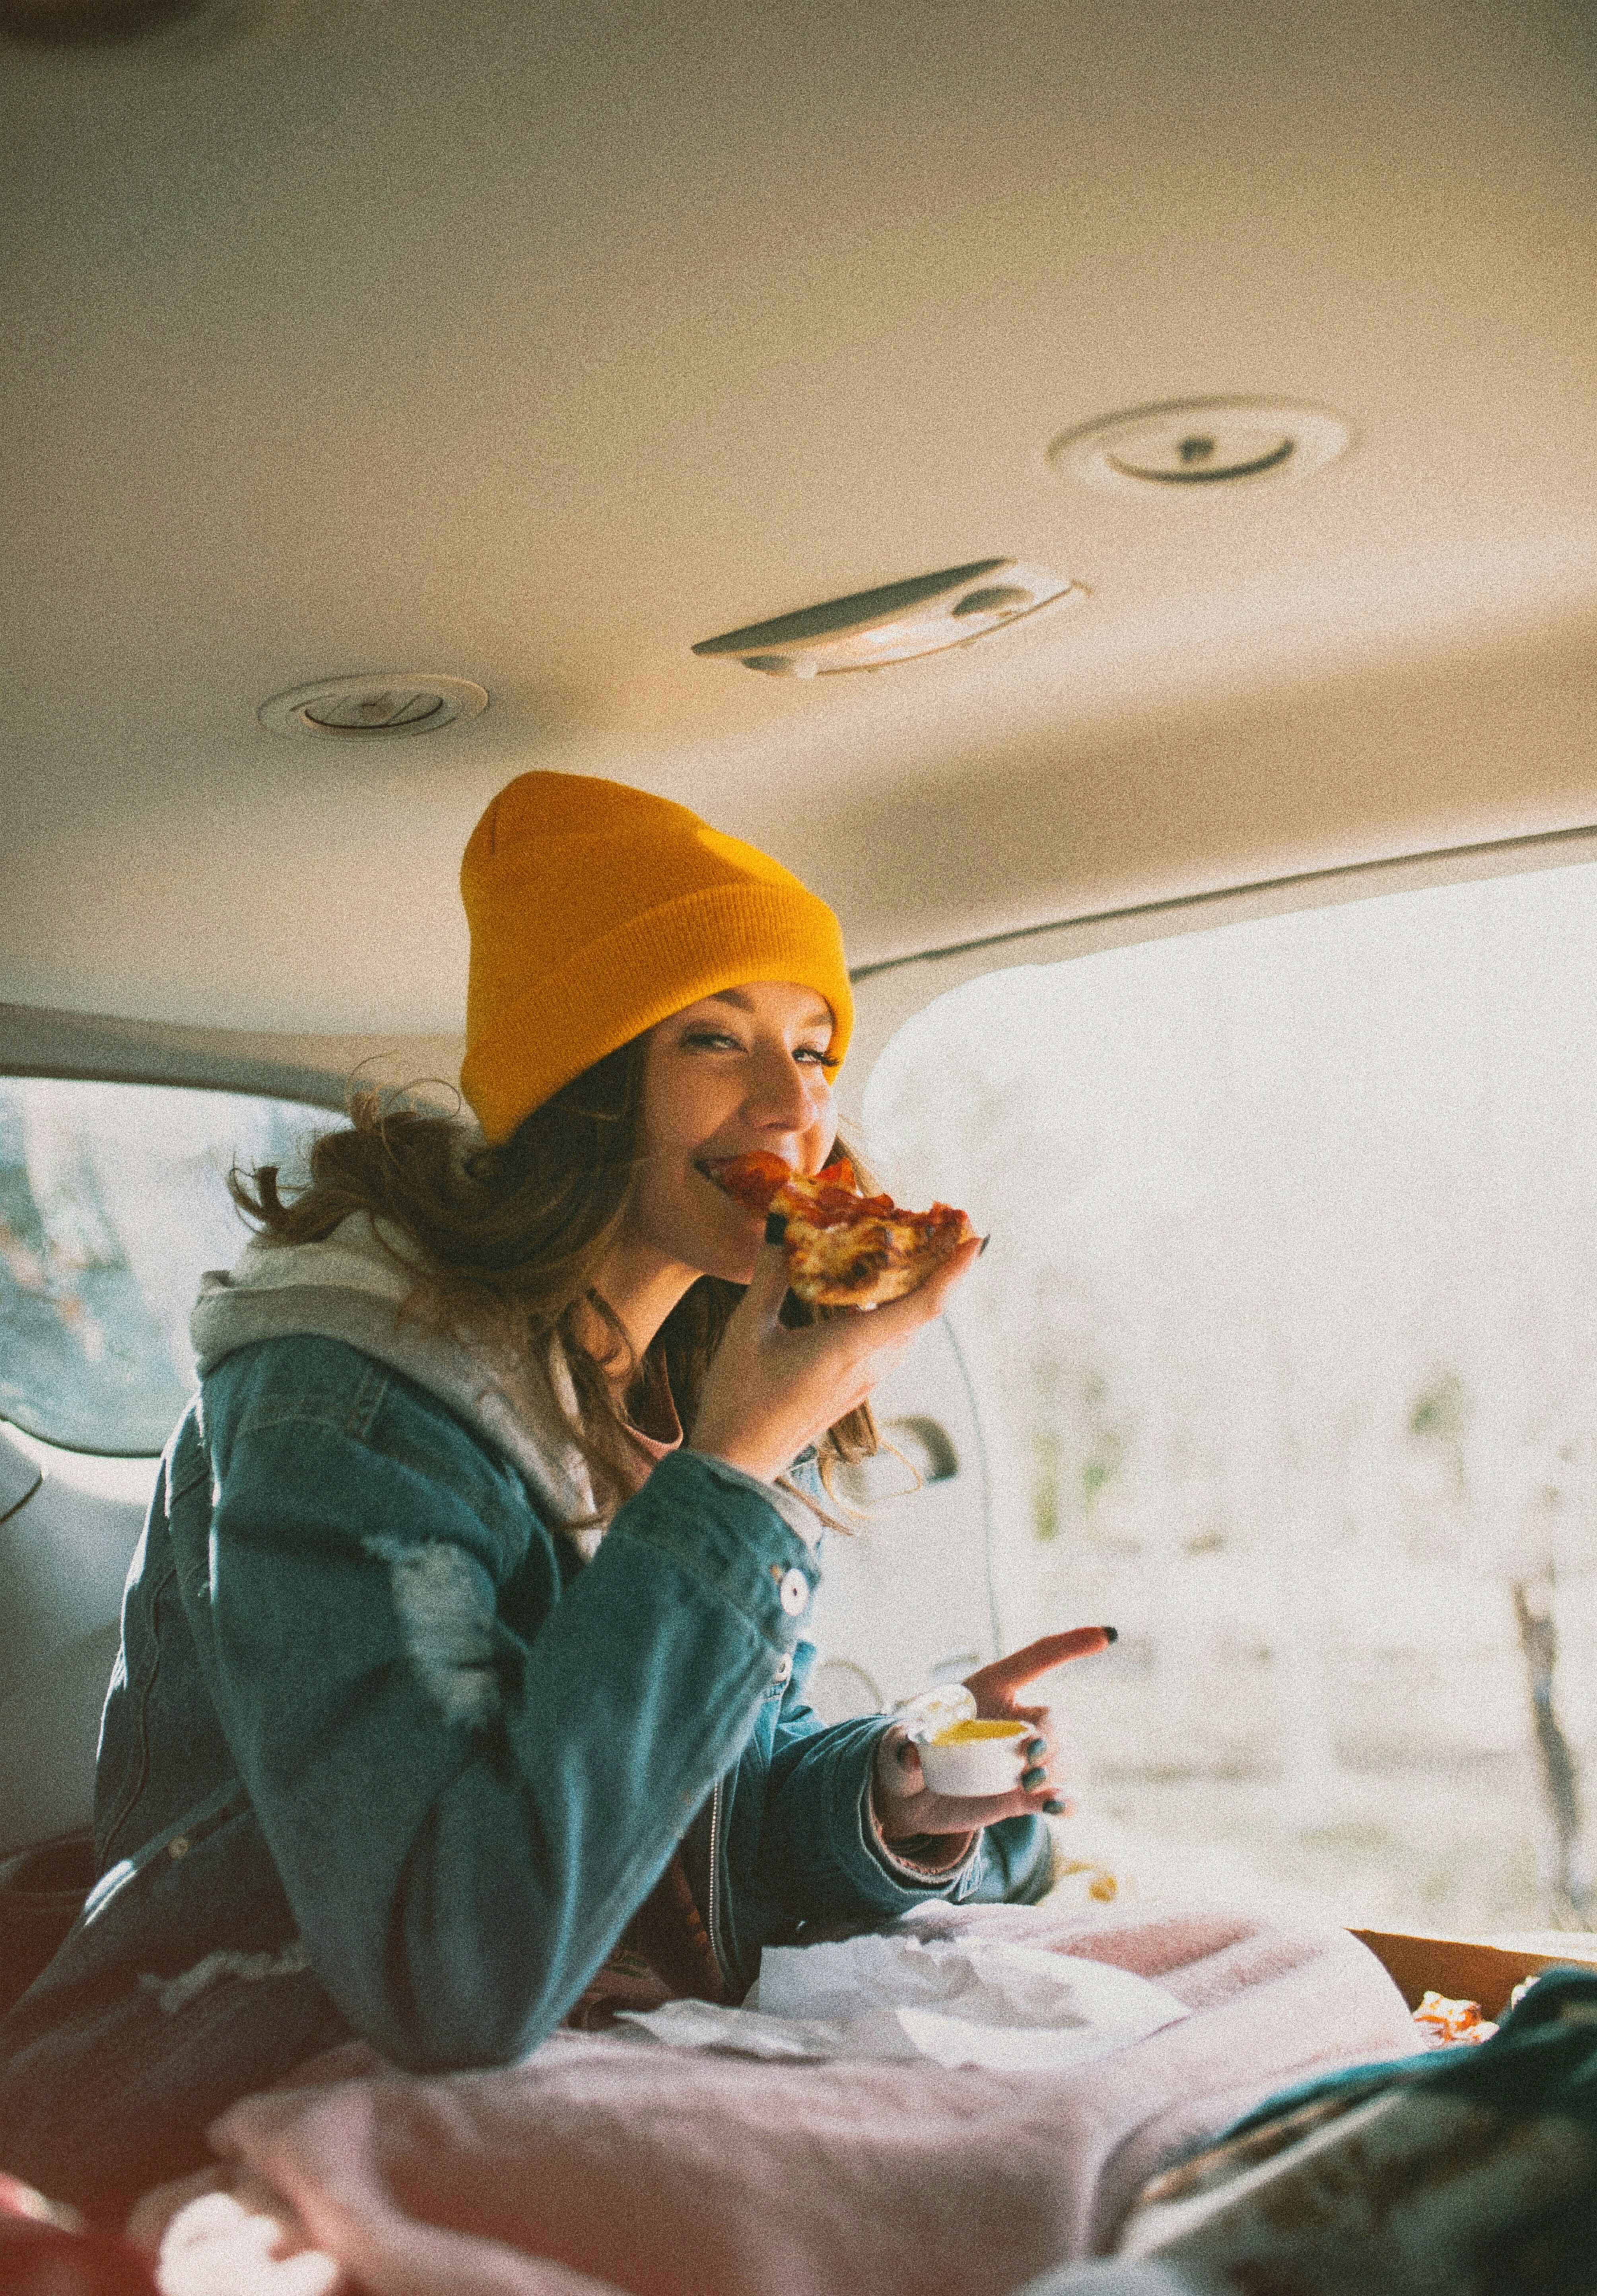 great photo recipe,how to photograph woman eating pizza inside vehicle